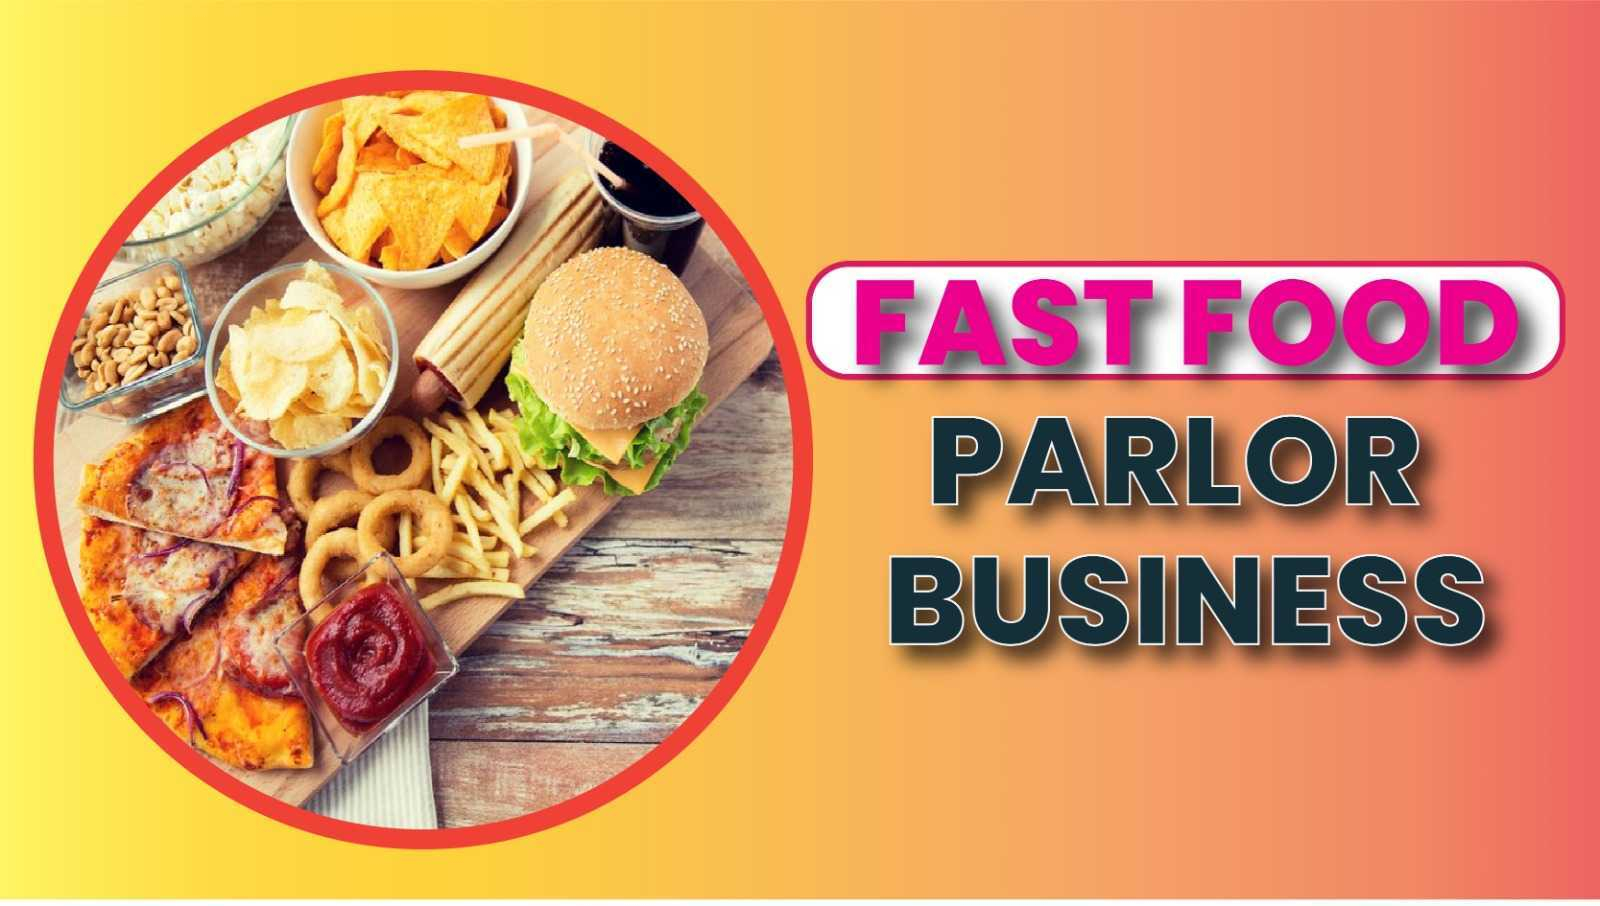 Fast Food Parlor Business